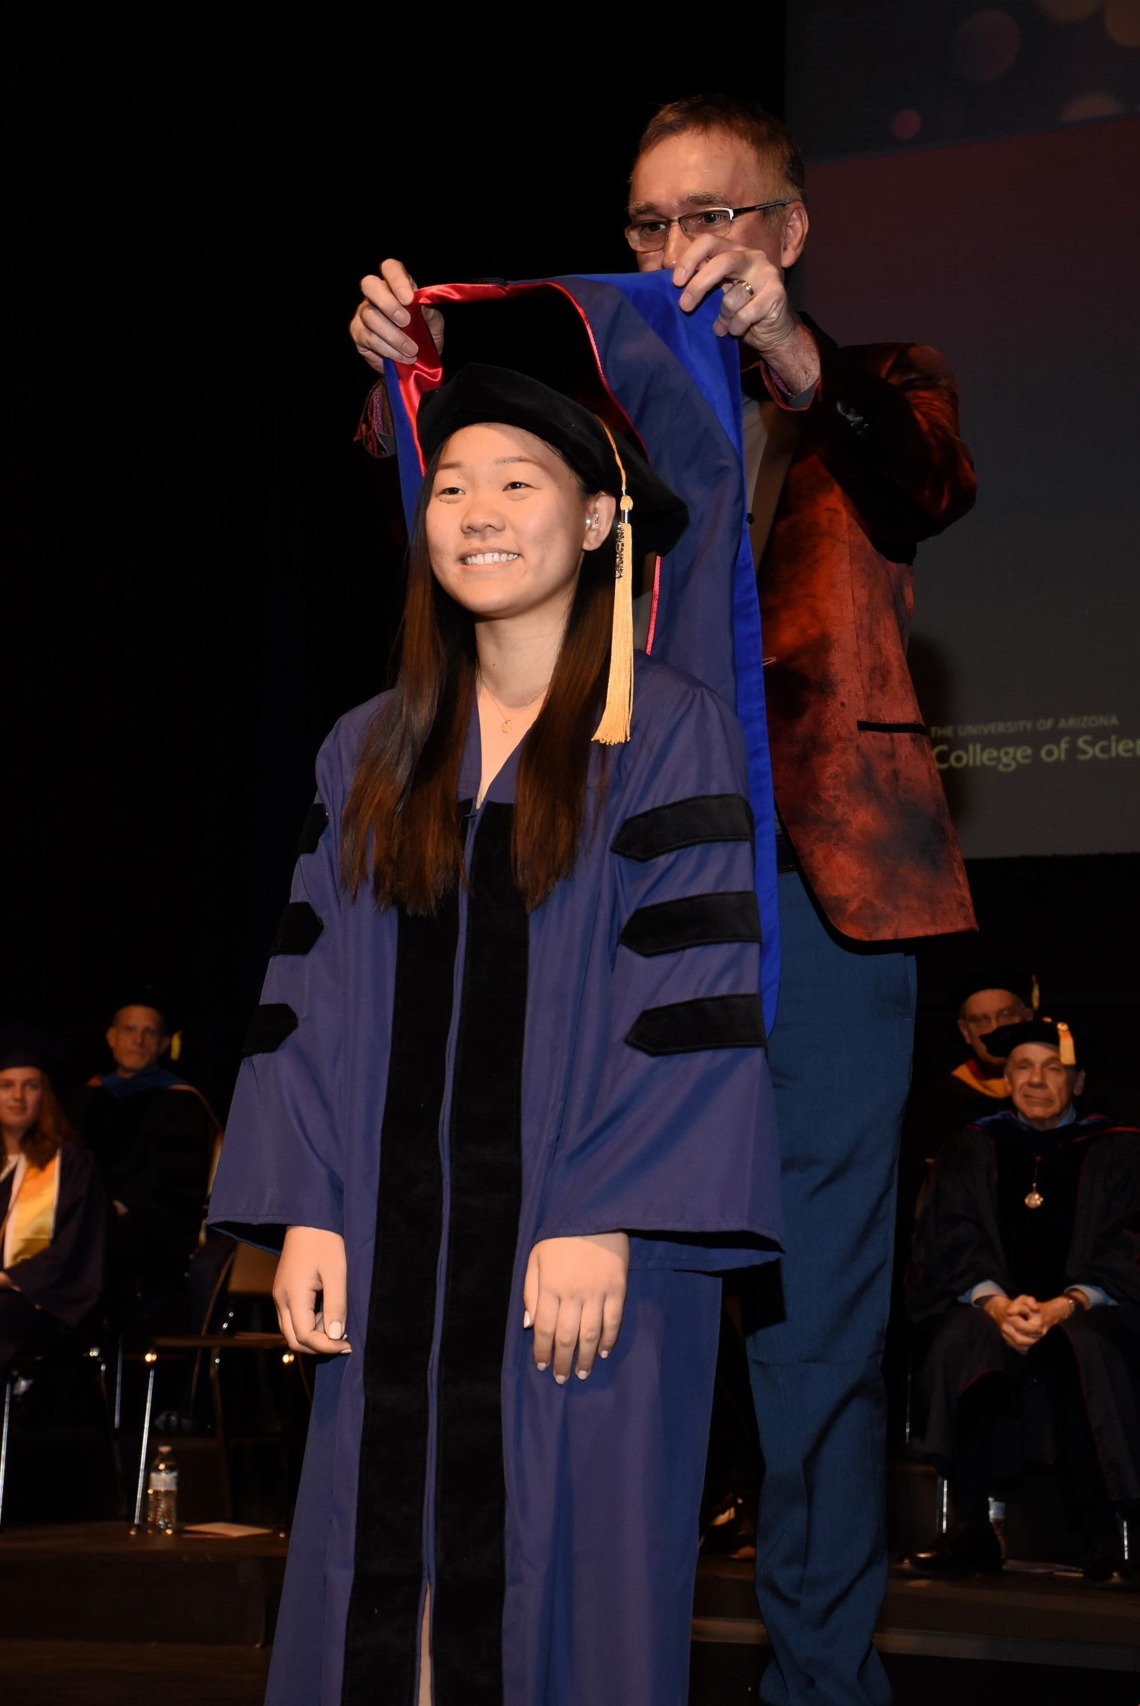 Beverly Feng presented with a PhD graduation garment by Dr. Andrei Sanov